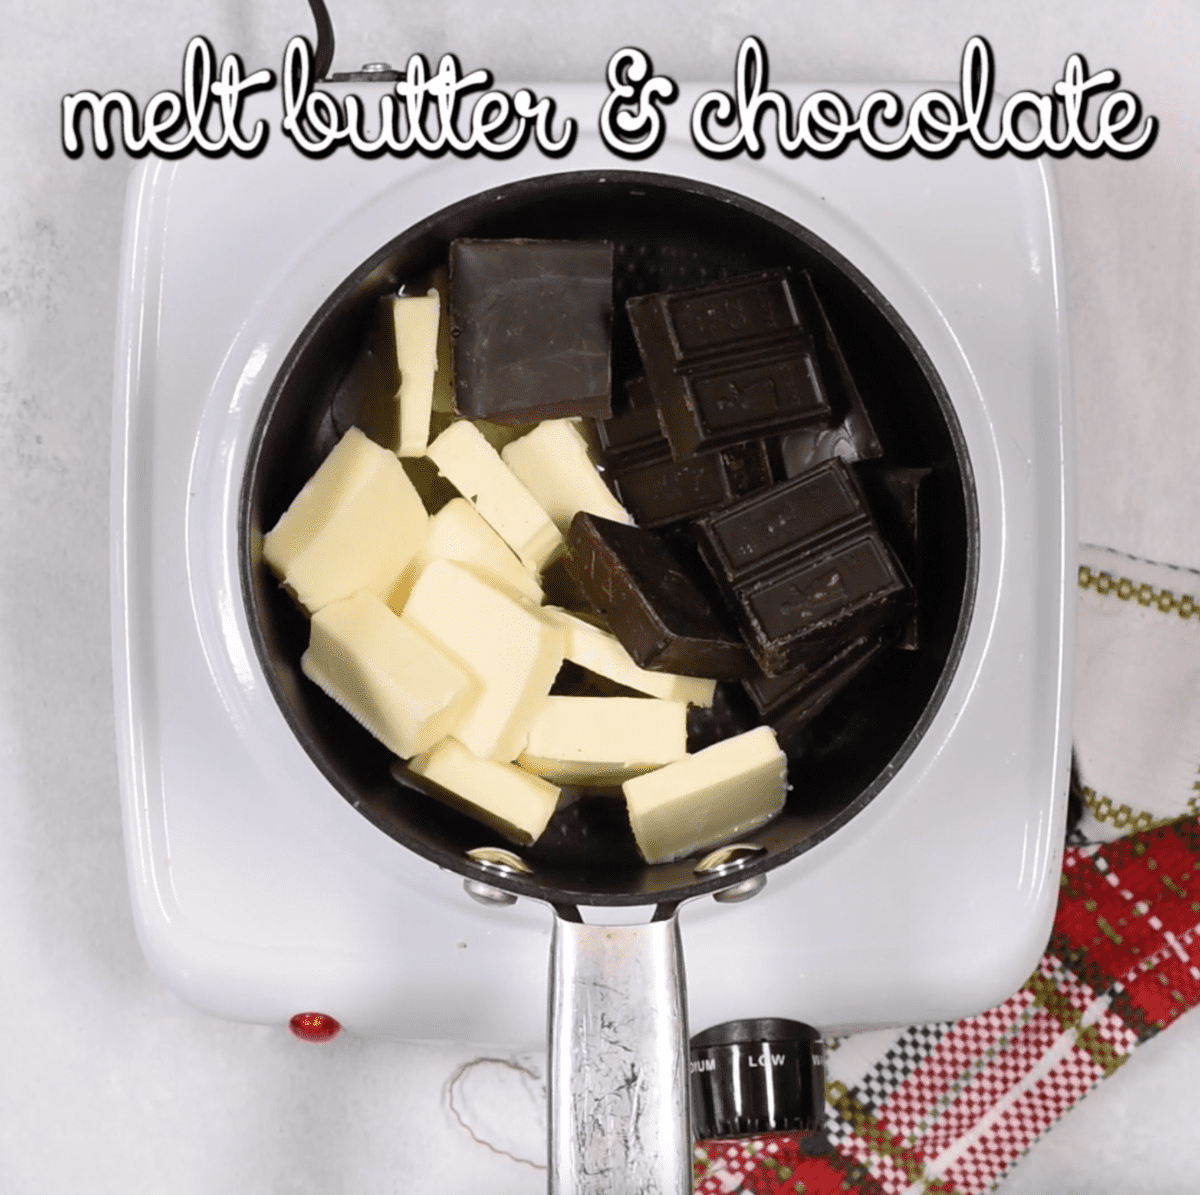 butter and chopped chocolate melting in saucepan